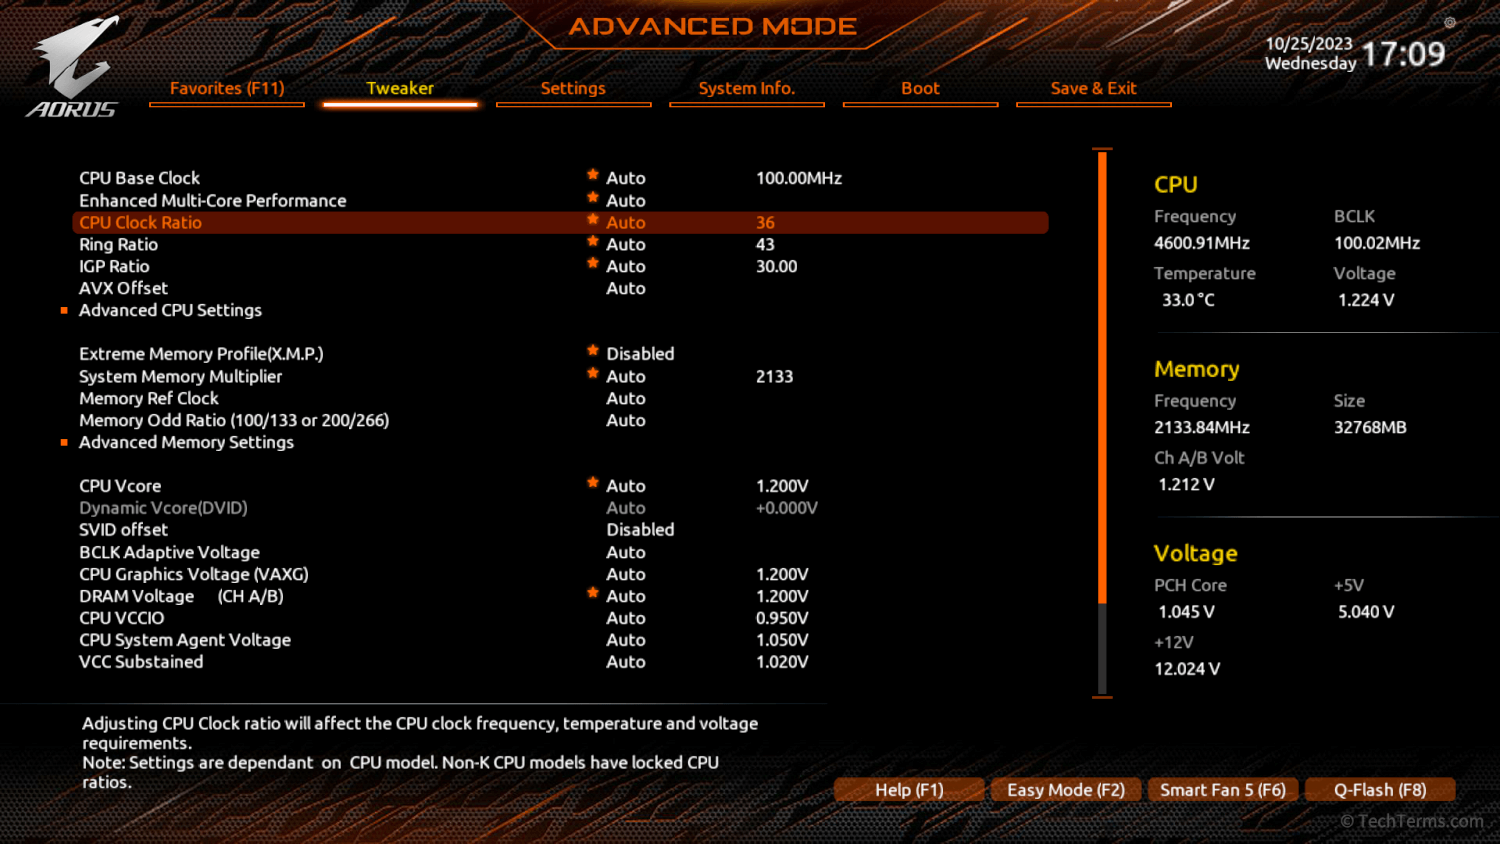 Overclocking options on an Aorus motherboard